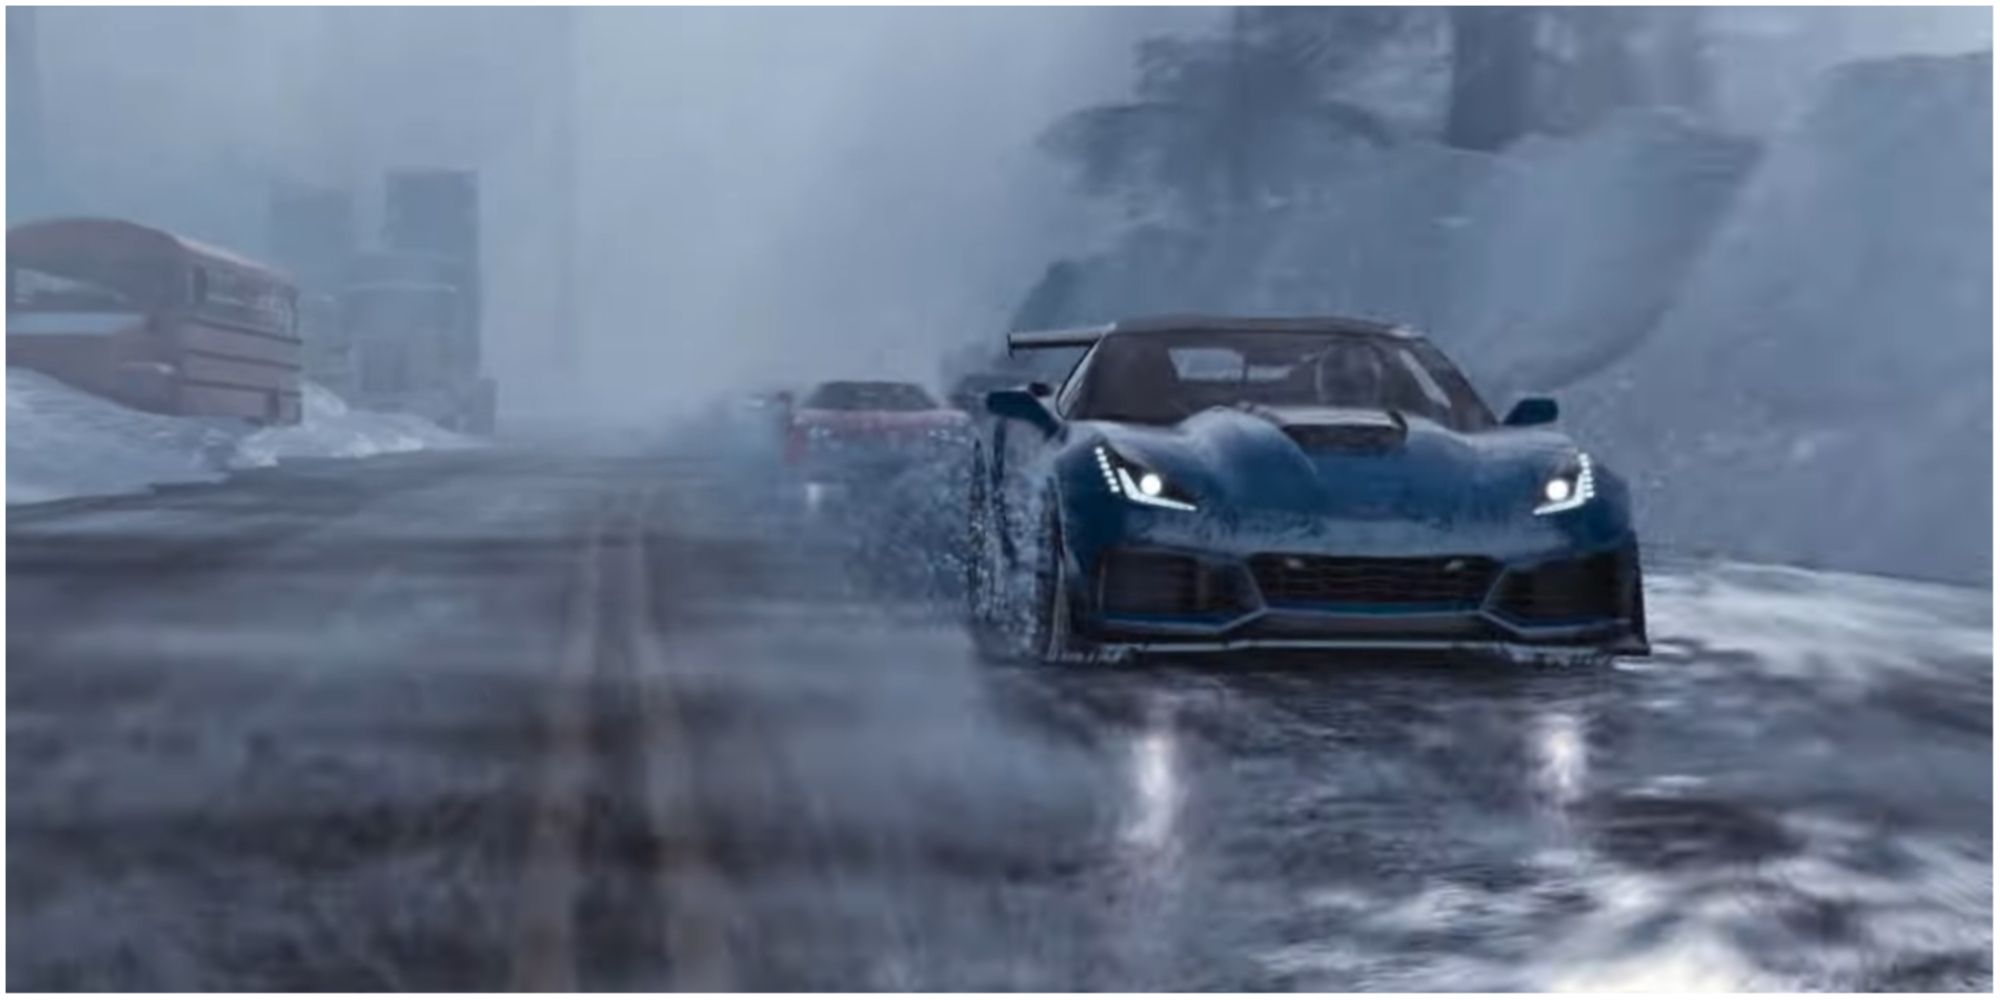 The Crew 2 Adds 20 New Cars And Live Summits In Latest Free Update -  GameSpot